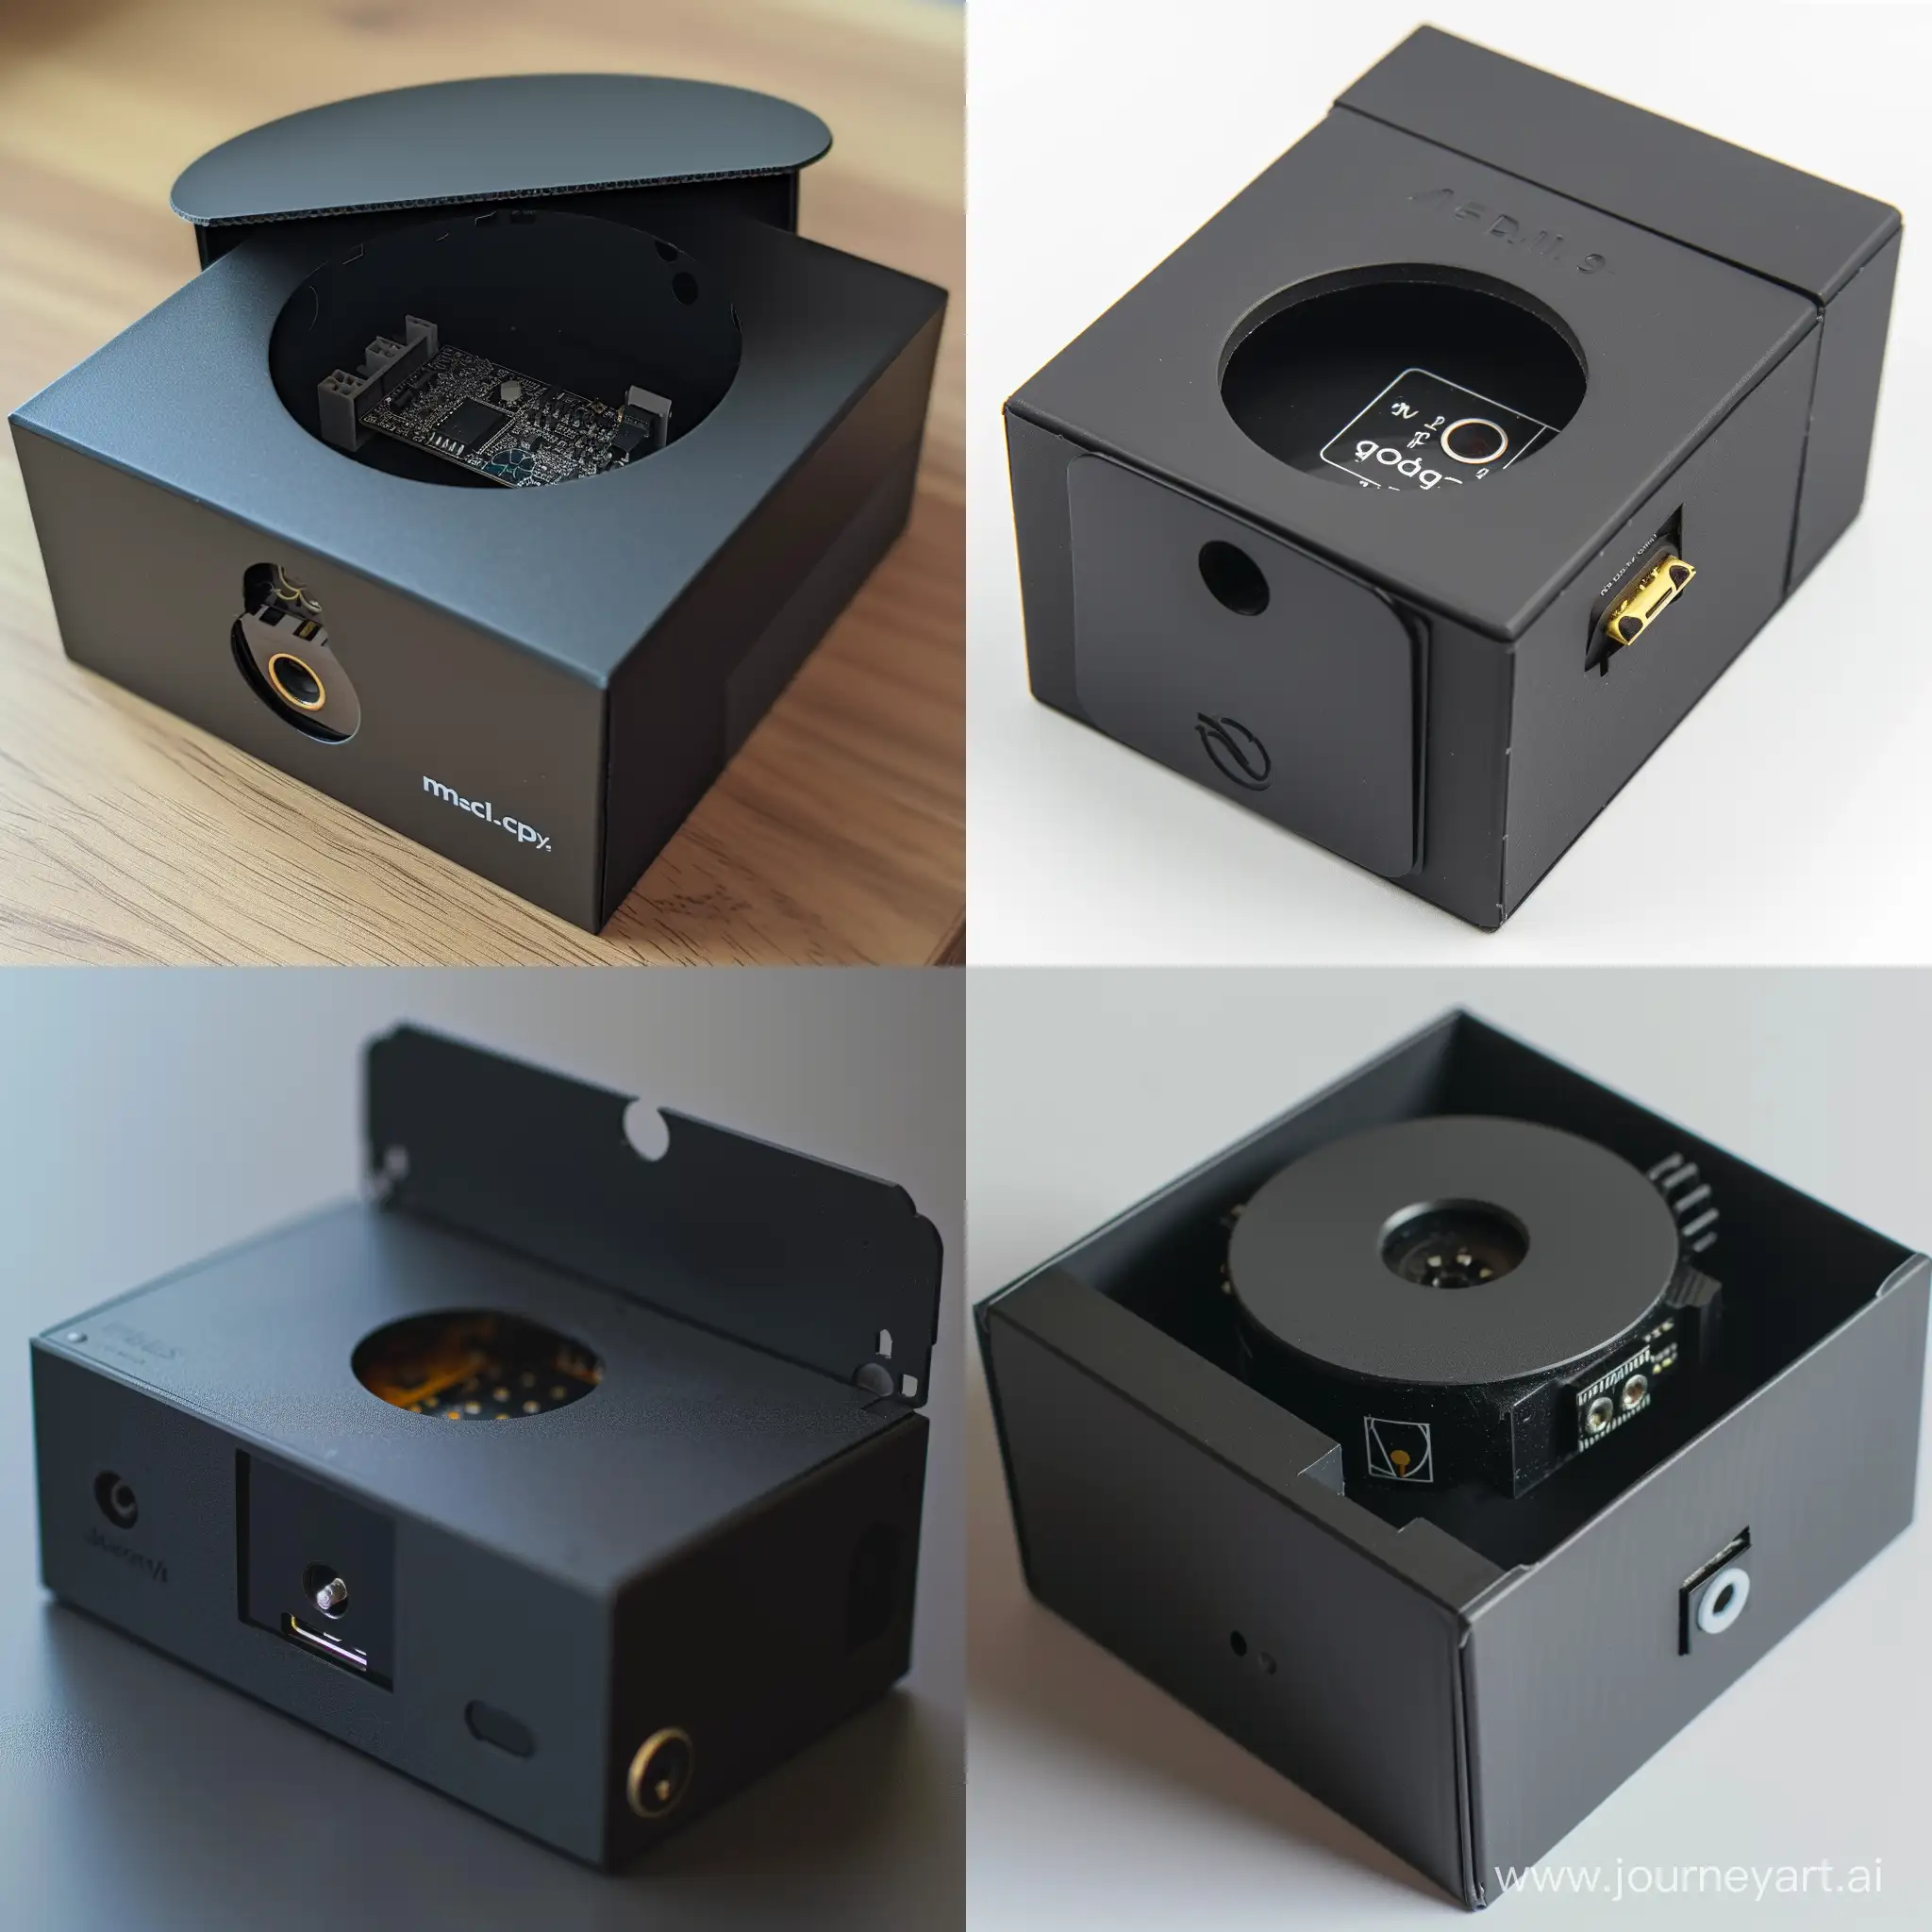 Black project box, the top side can be opened, a circular hole in the middle of the top side, on the side of the hole is a push button, from the hole you can see a ESP-32.